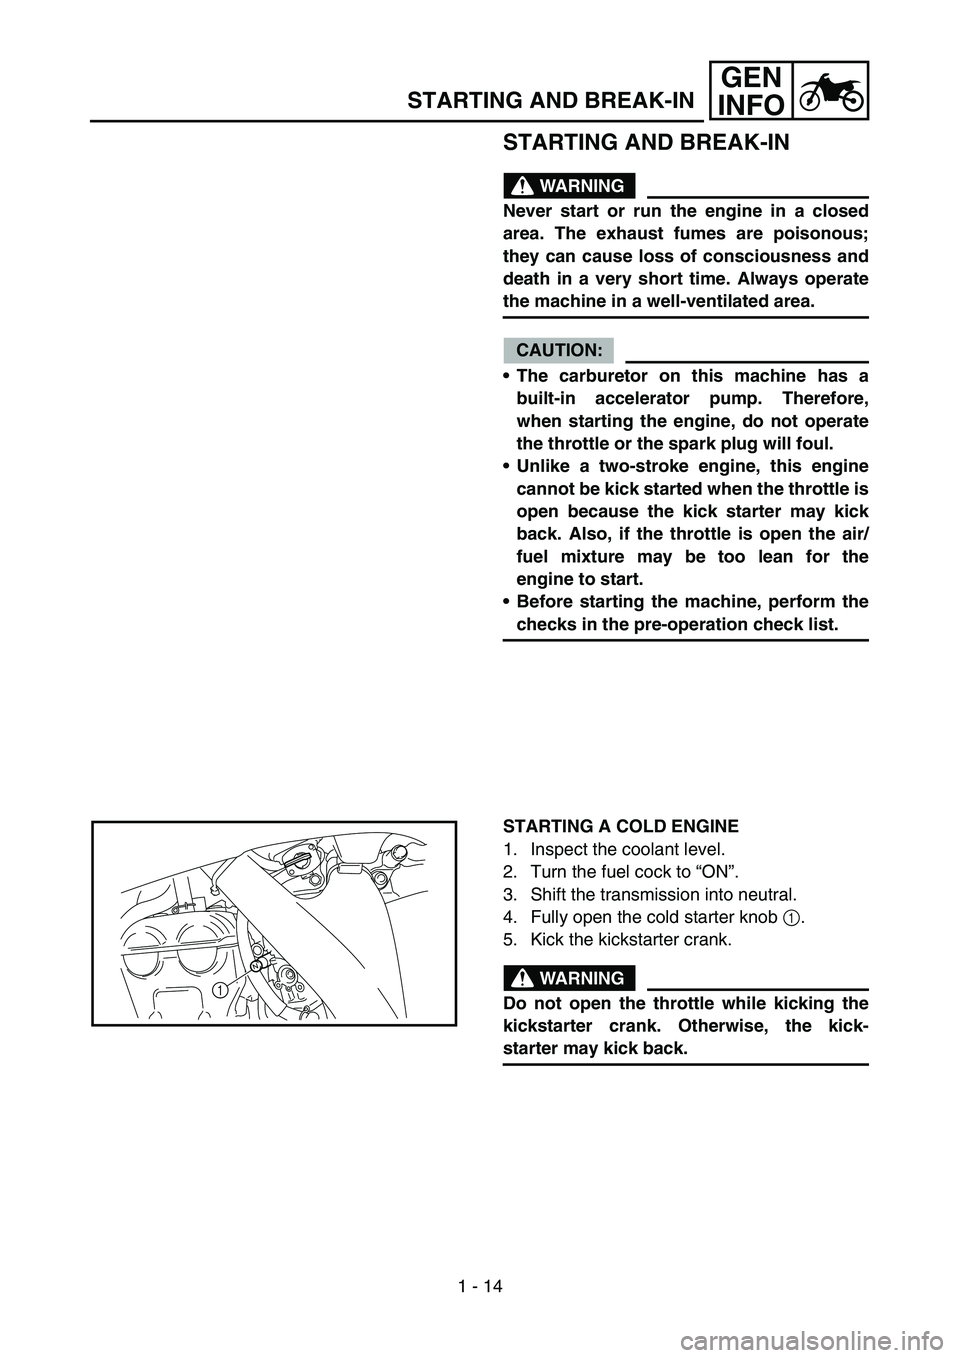 YAMAHA YZ250F 2007  Owners Manual 1 - 14
GEN
INFO
STARTING AND BREAK-IN
WARNING
Never start or run the engine in a closed
area. The exhaust fumes are poisonous;
they can cause loss of consciousness and
death in a very short time. Alwa